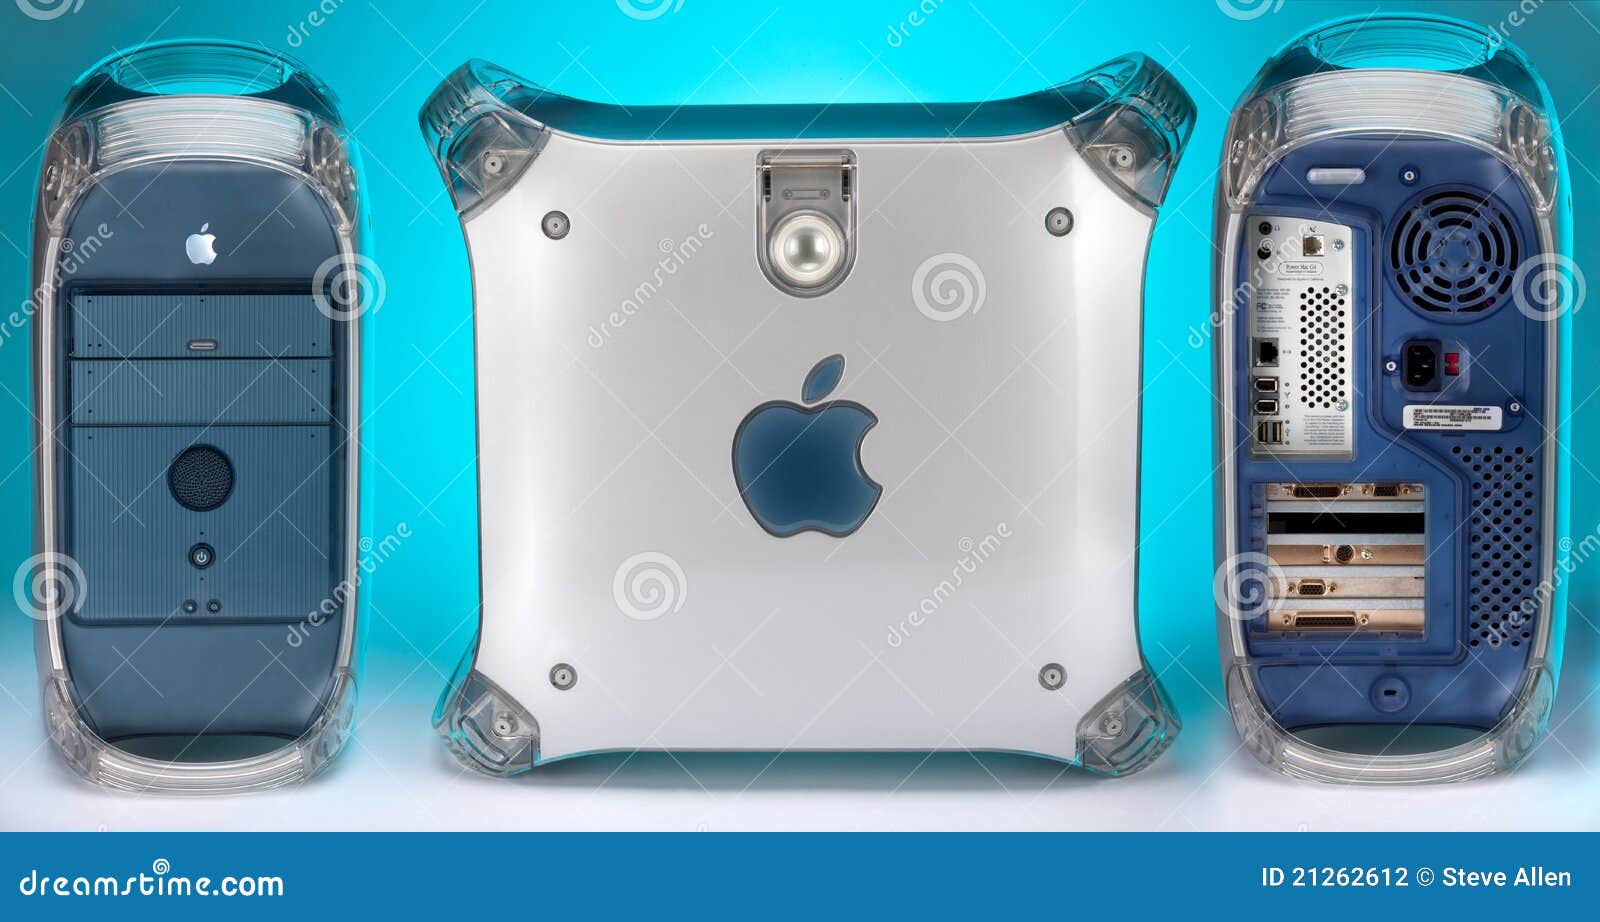 Apple Power Mac G4 Computer (1999-2004) Editorial Photography - Image of  system, jobs: 21262612